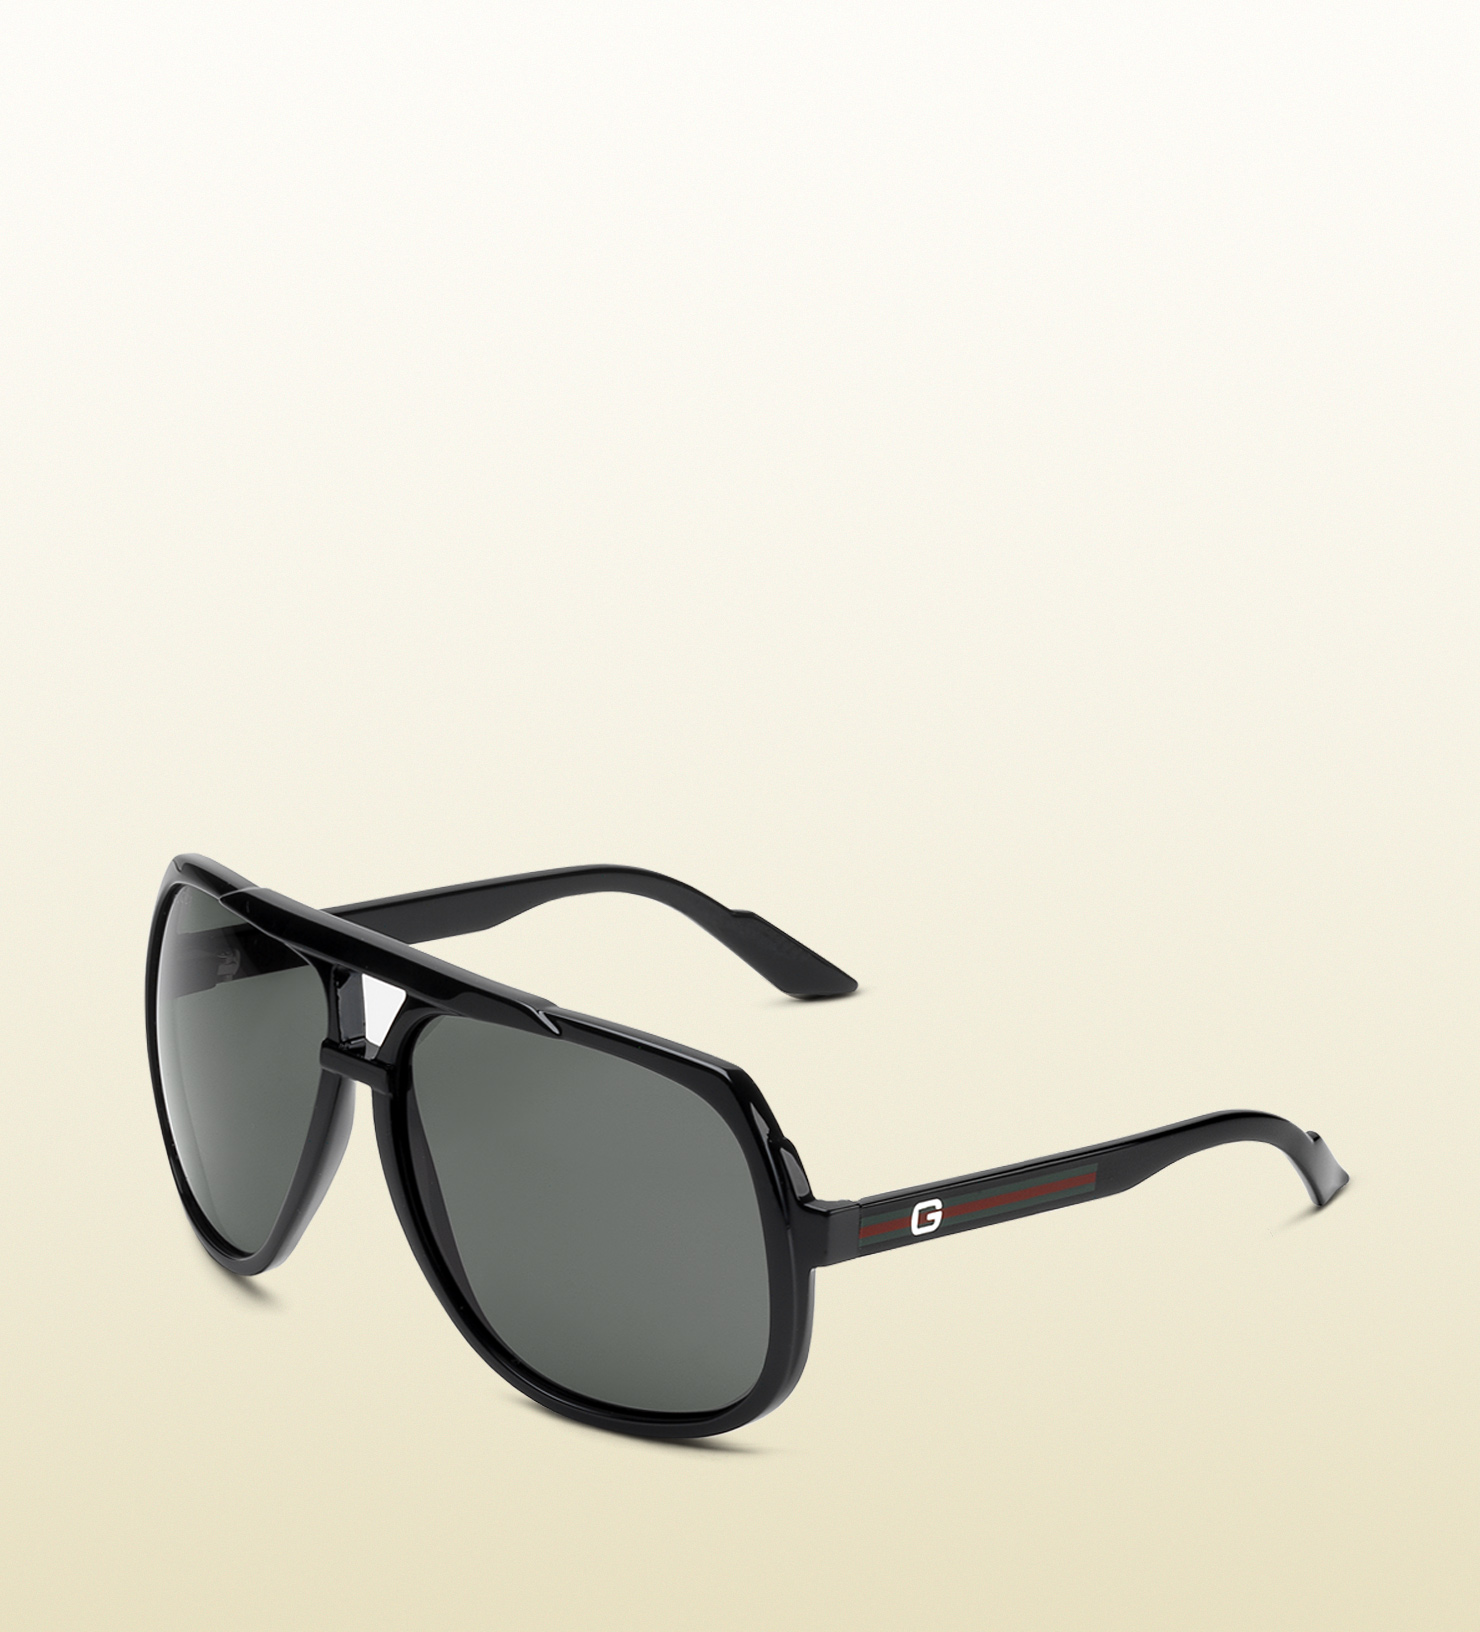 højde by Udløbet Gucci Large Aviator Sunglasses With G Detail And Signature Web On Temple in  Black for Men - Lyst